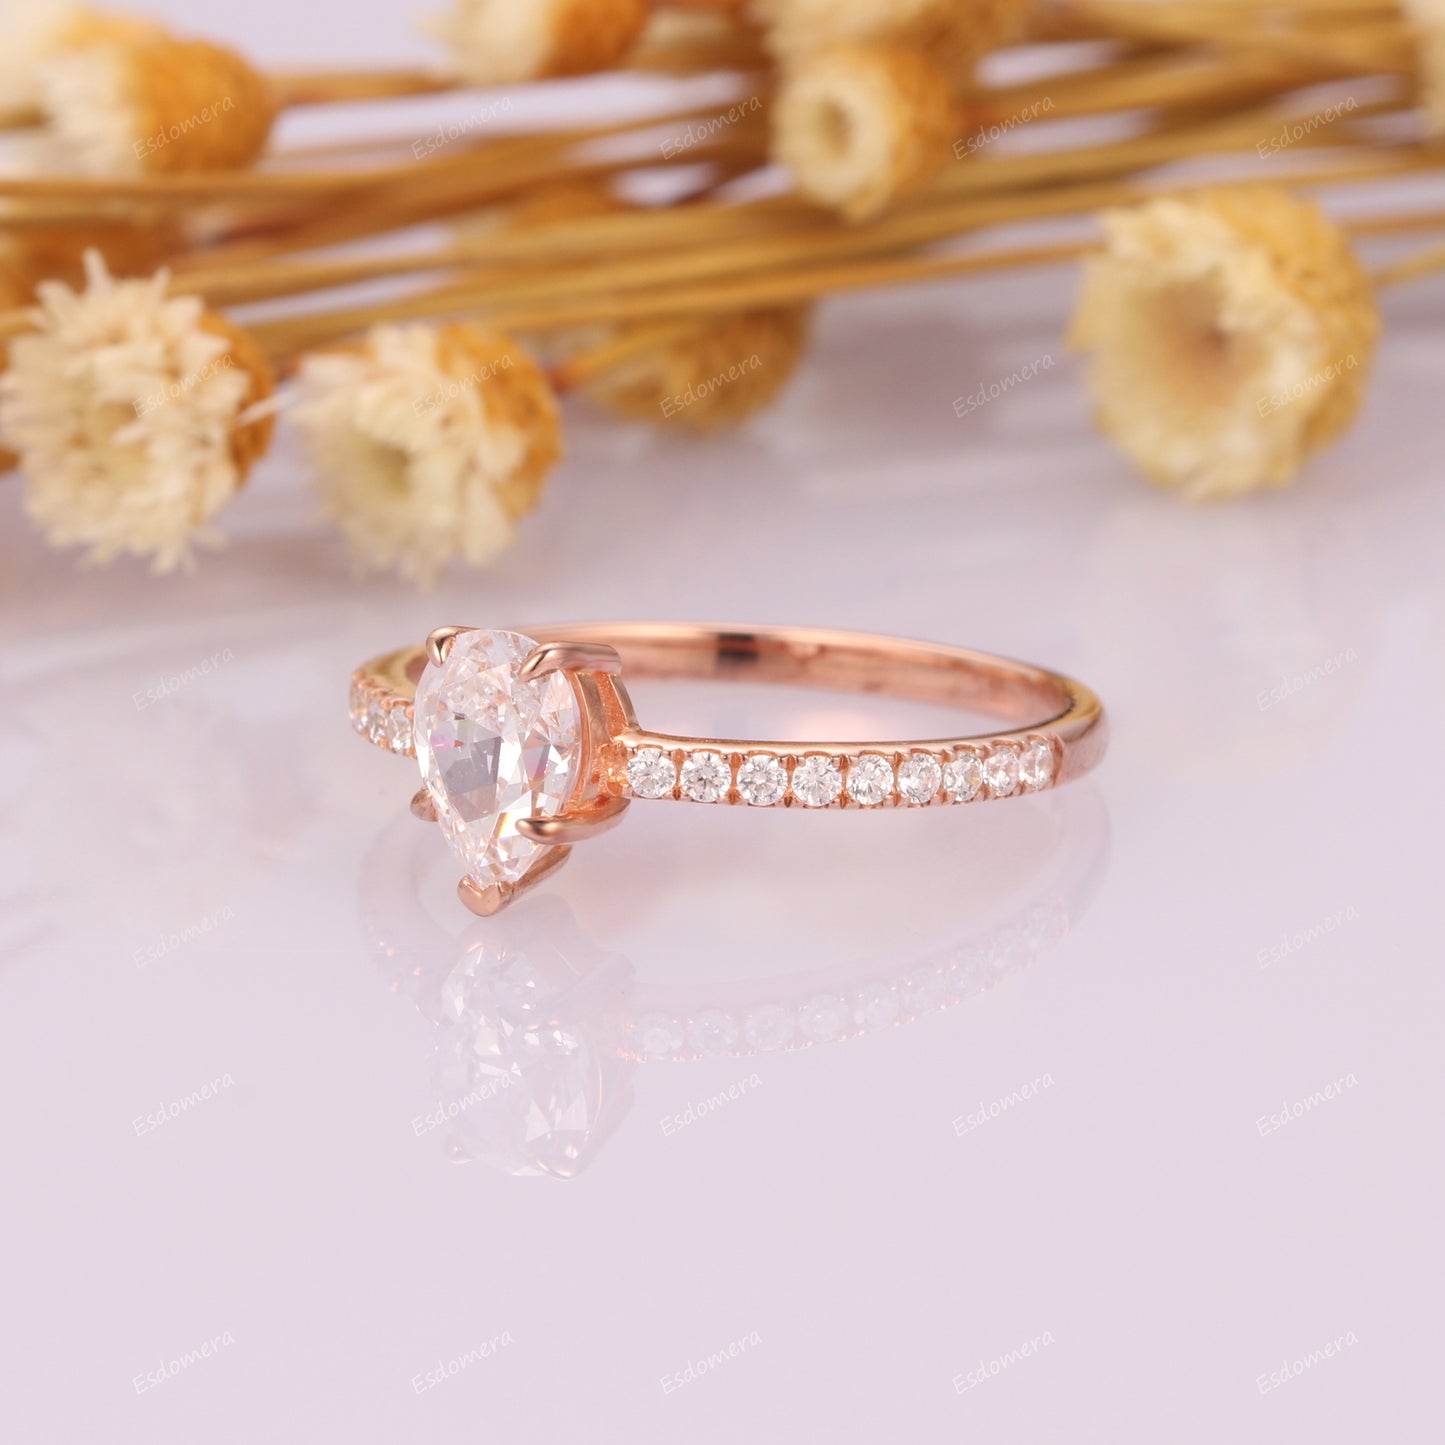 5 Prongs 0.8CT Pear Cut Moissanite Engagement Ring, 14k Rose Gold Anniversary Ring For Her, Half Eternity Bridal Ring